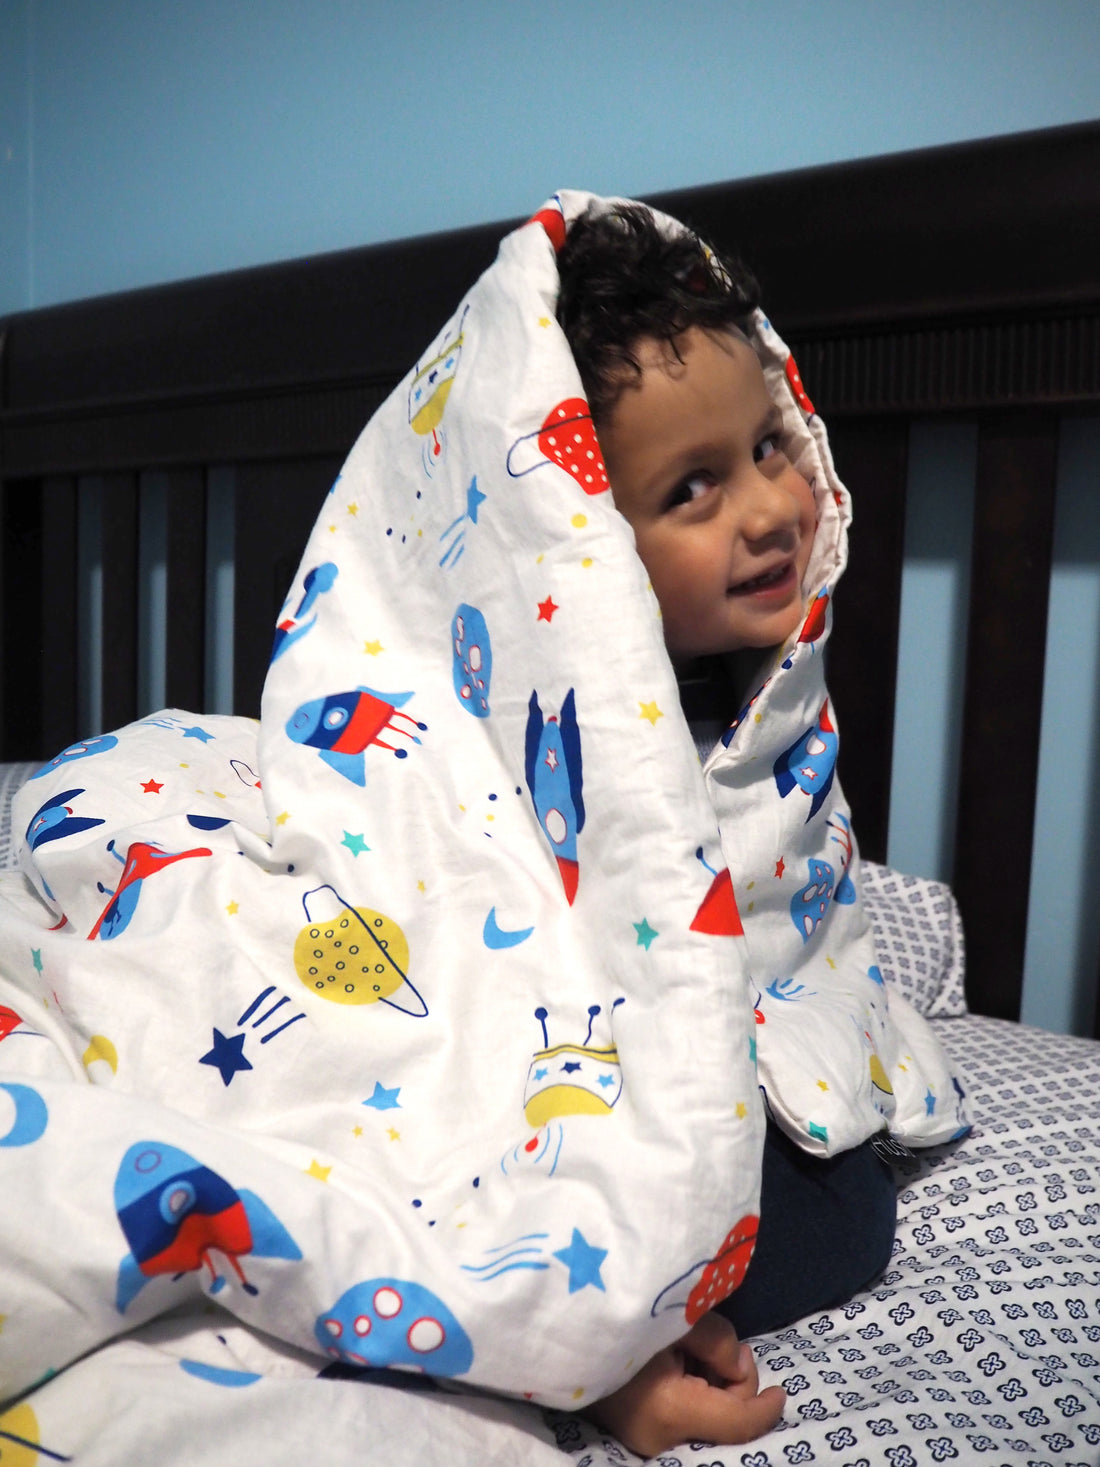 weighted blankets for kids: Child smiling while wrapped in a blanket